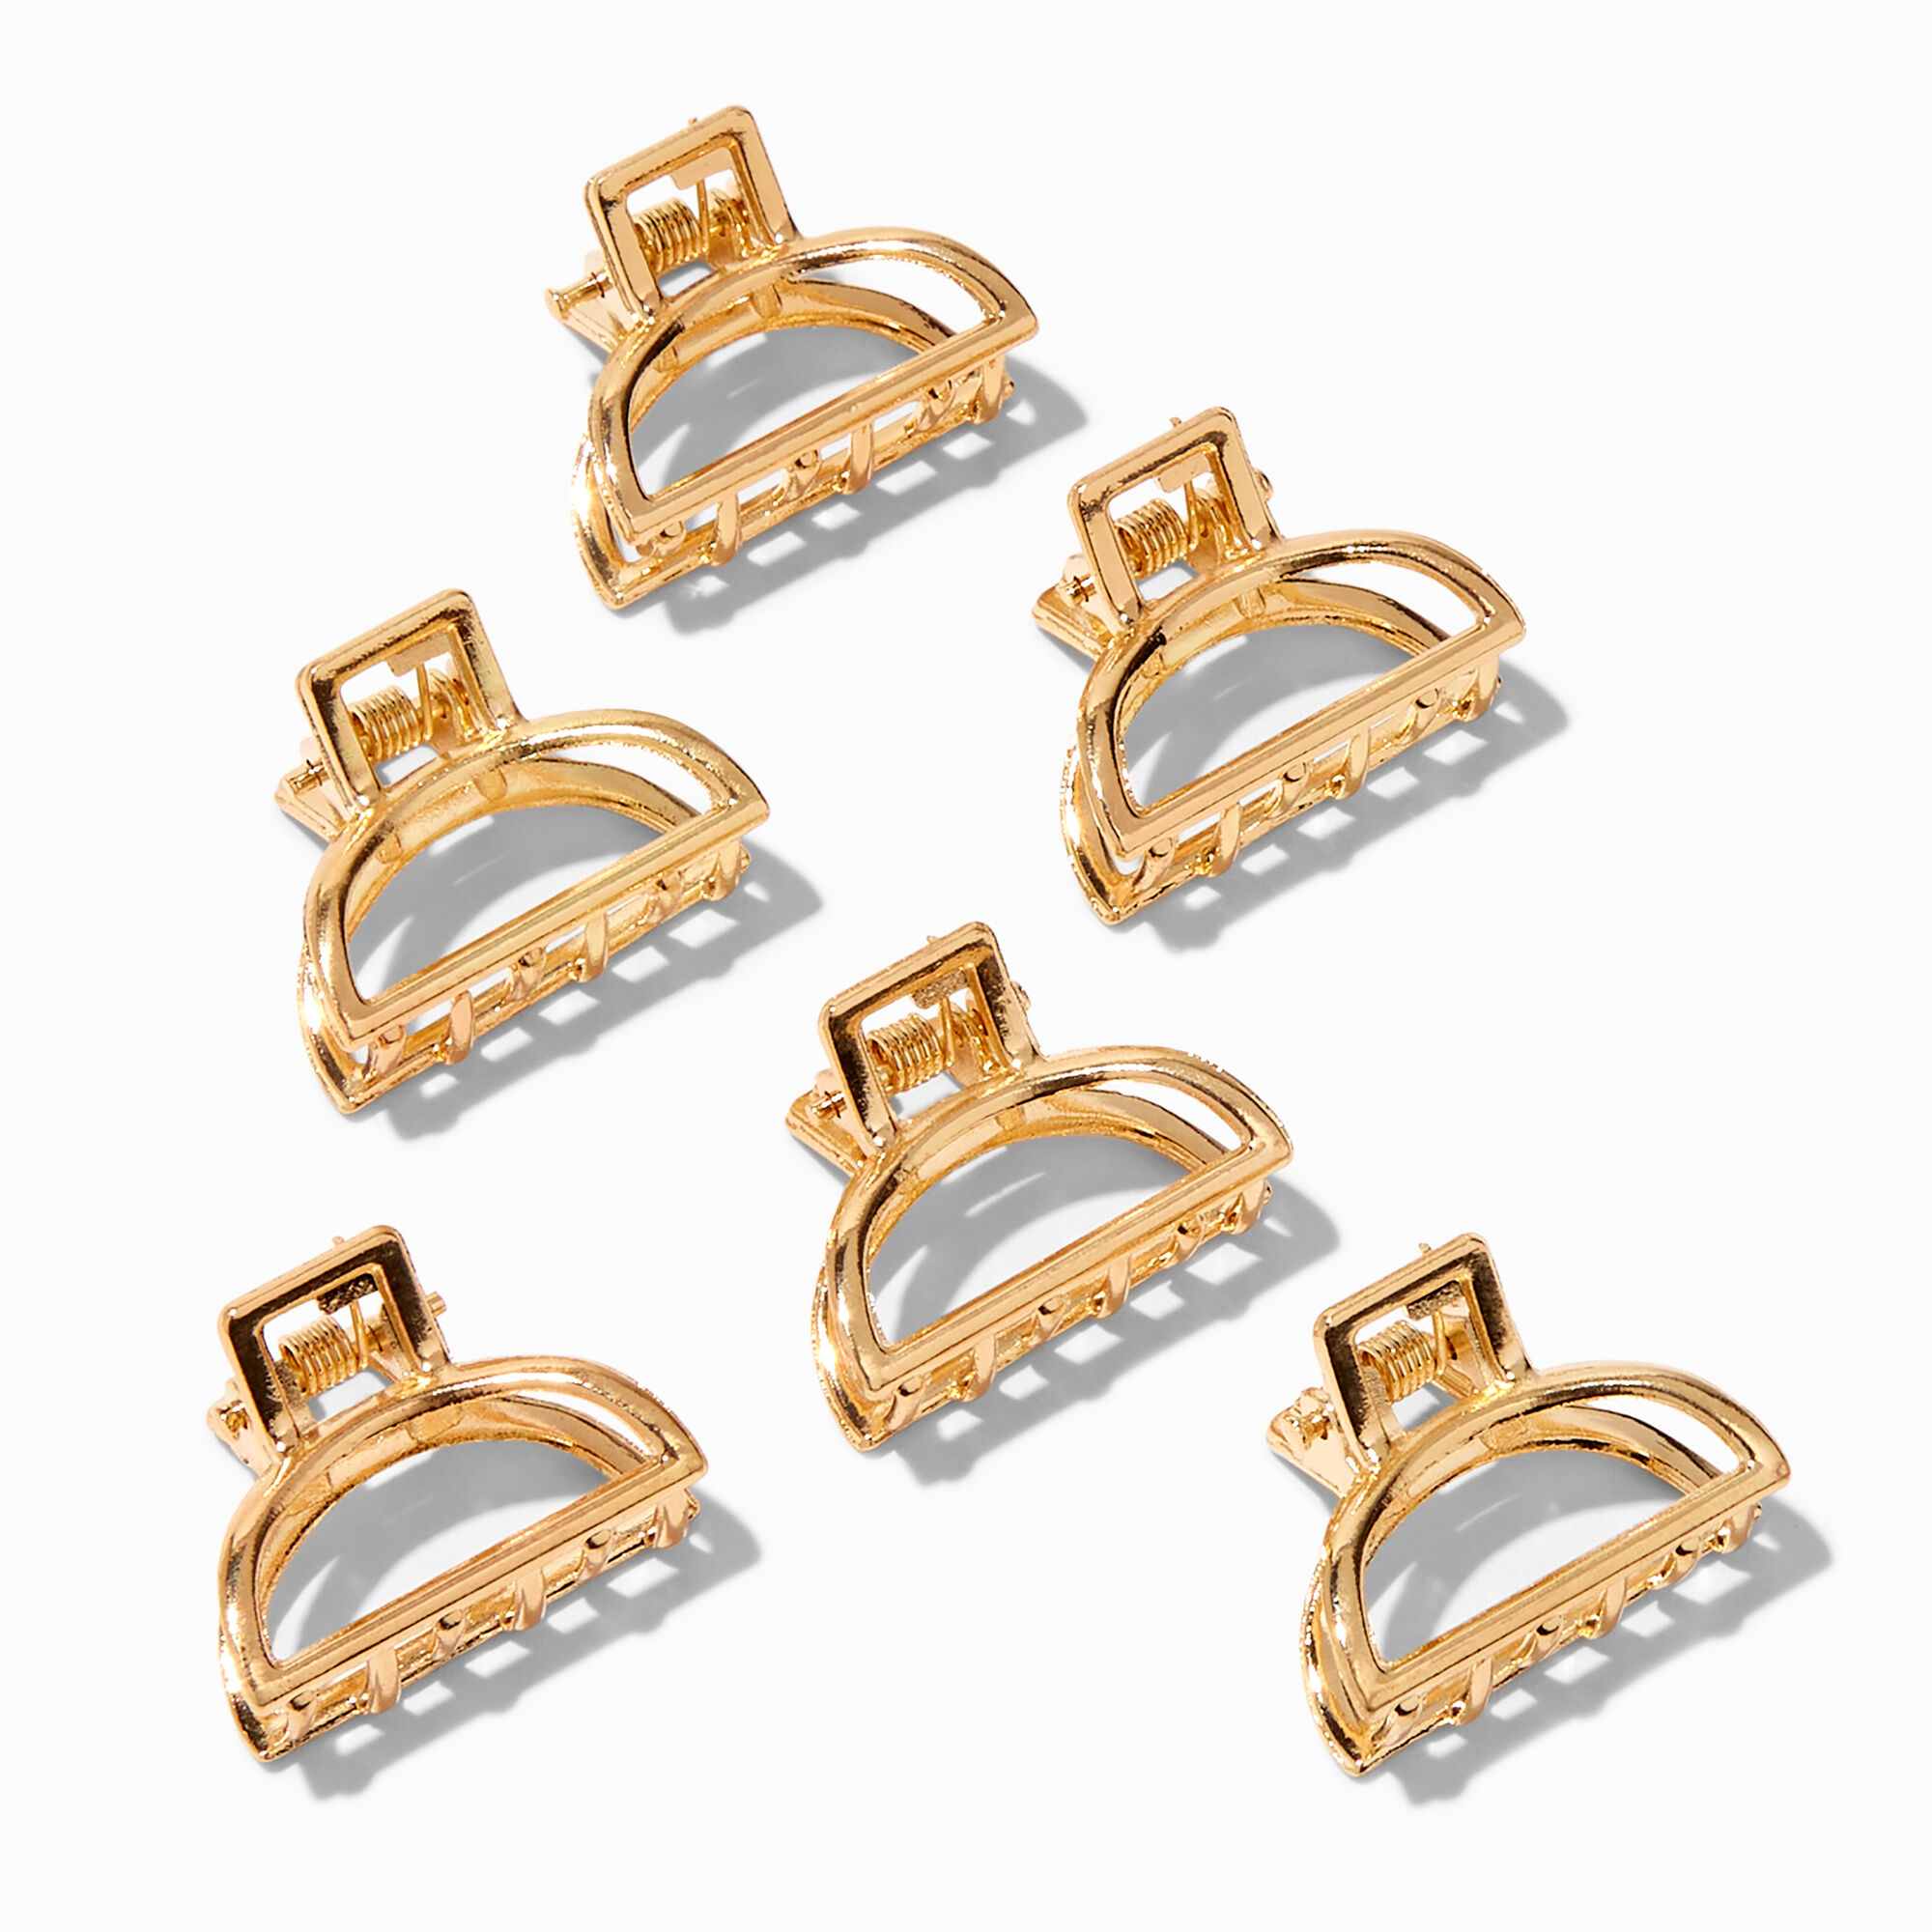 View Claires Arch Cutout Hair Claws 6 Pack Gold information